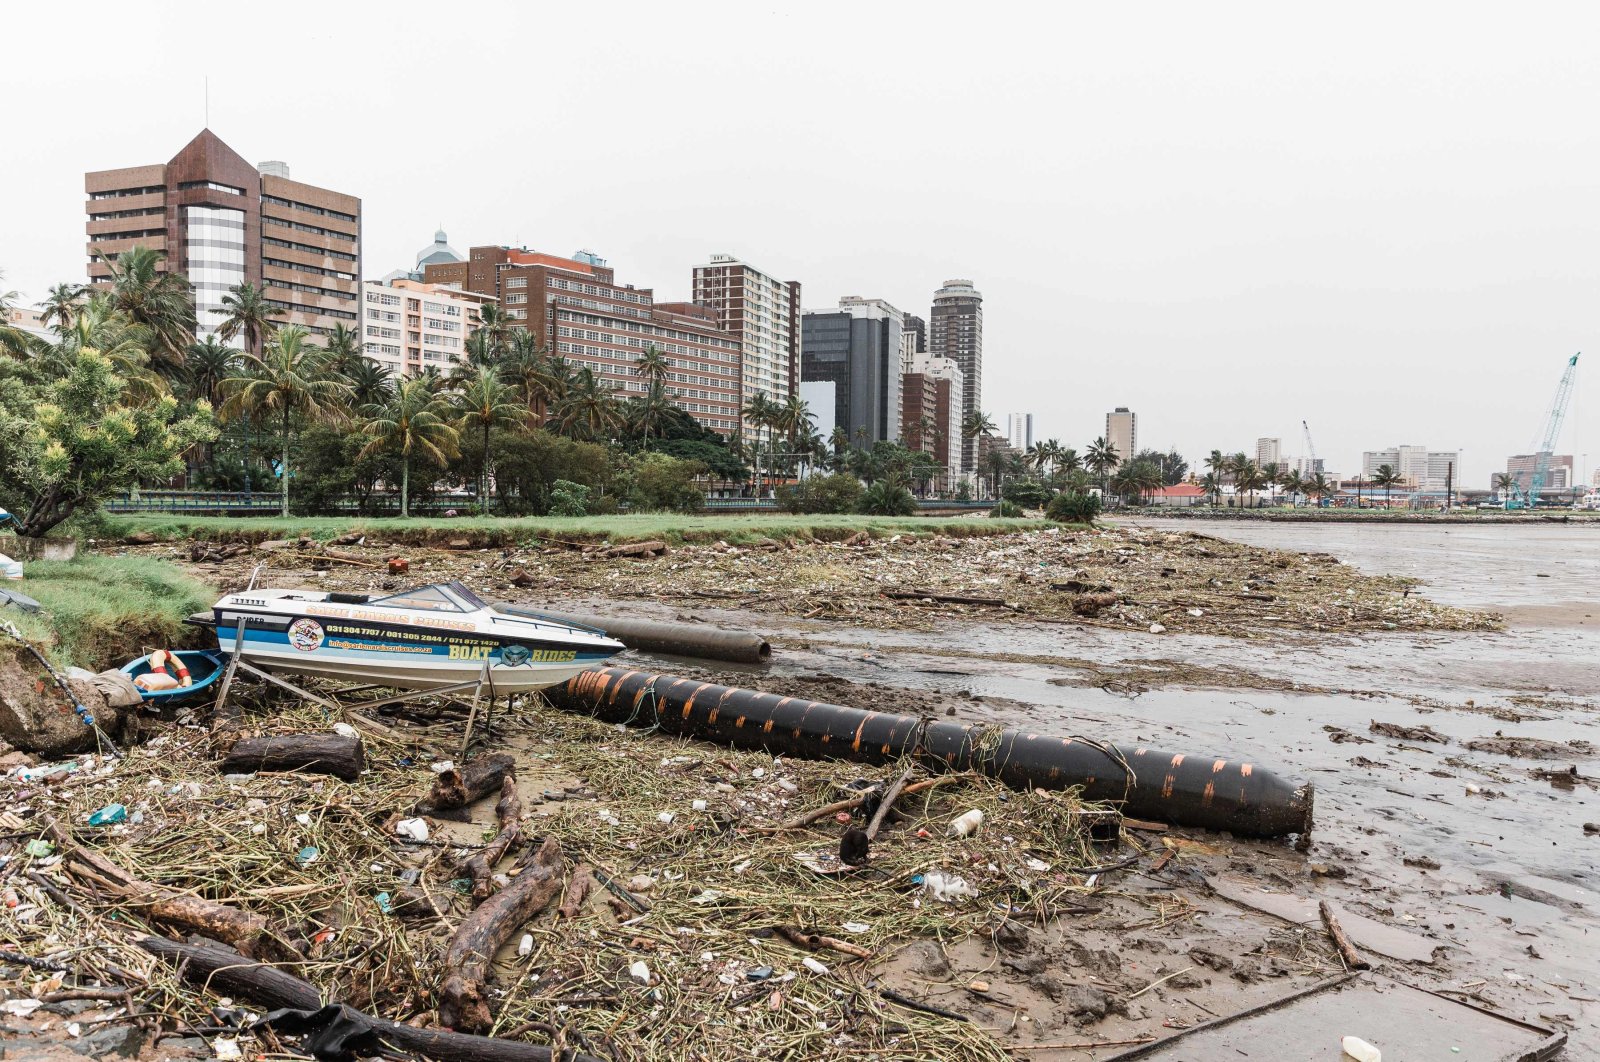 Massive debris at the Durban harbor following heavy rains, mudslides and rain and winds in Durban, South Africa, April 16, 2022. (AFP Photo)